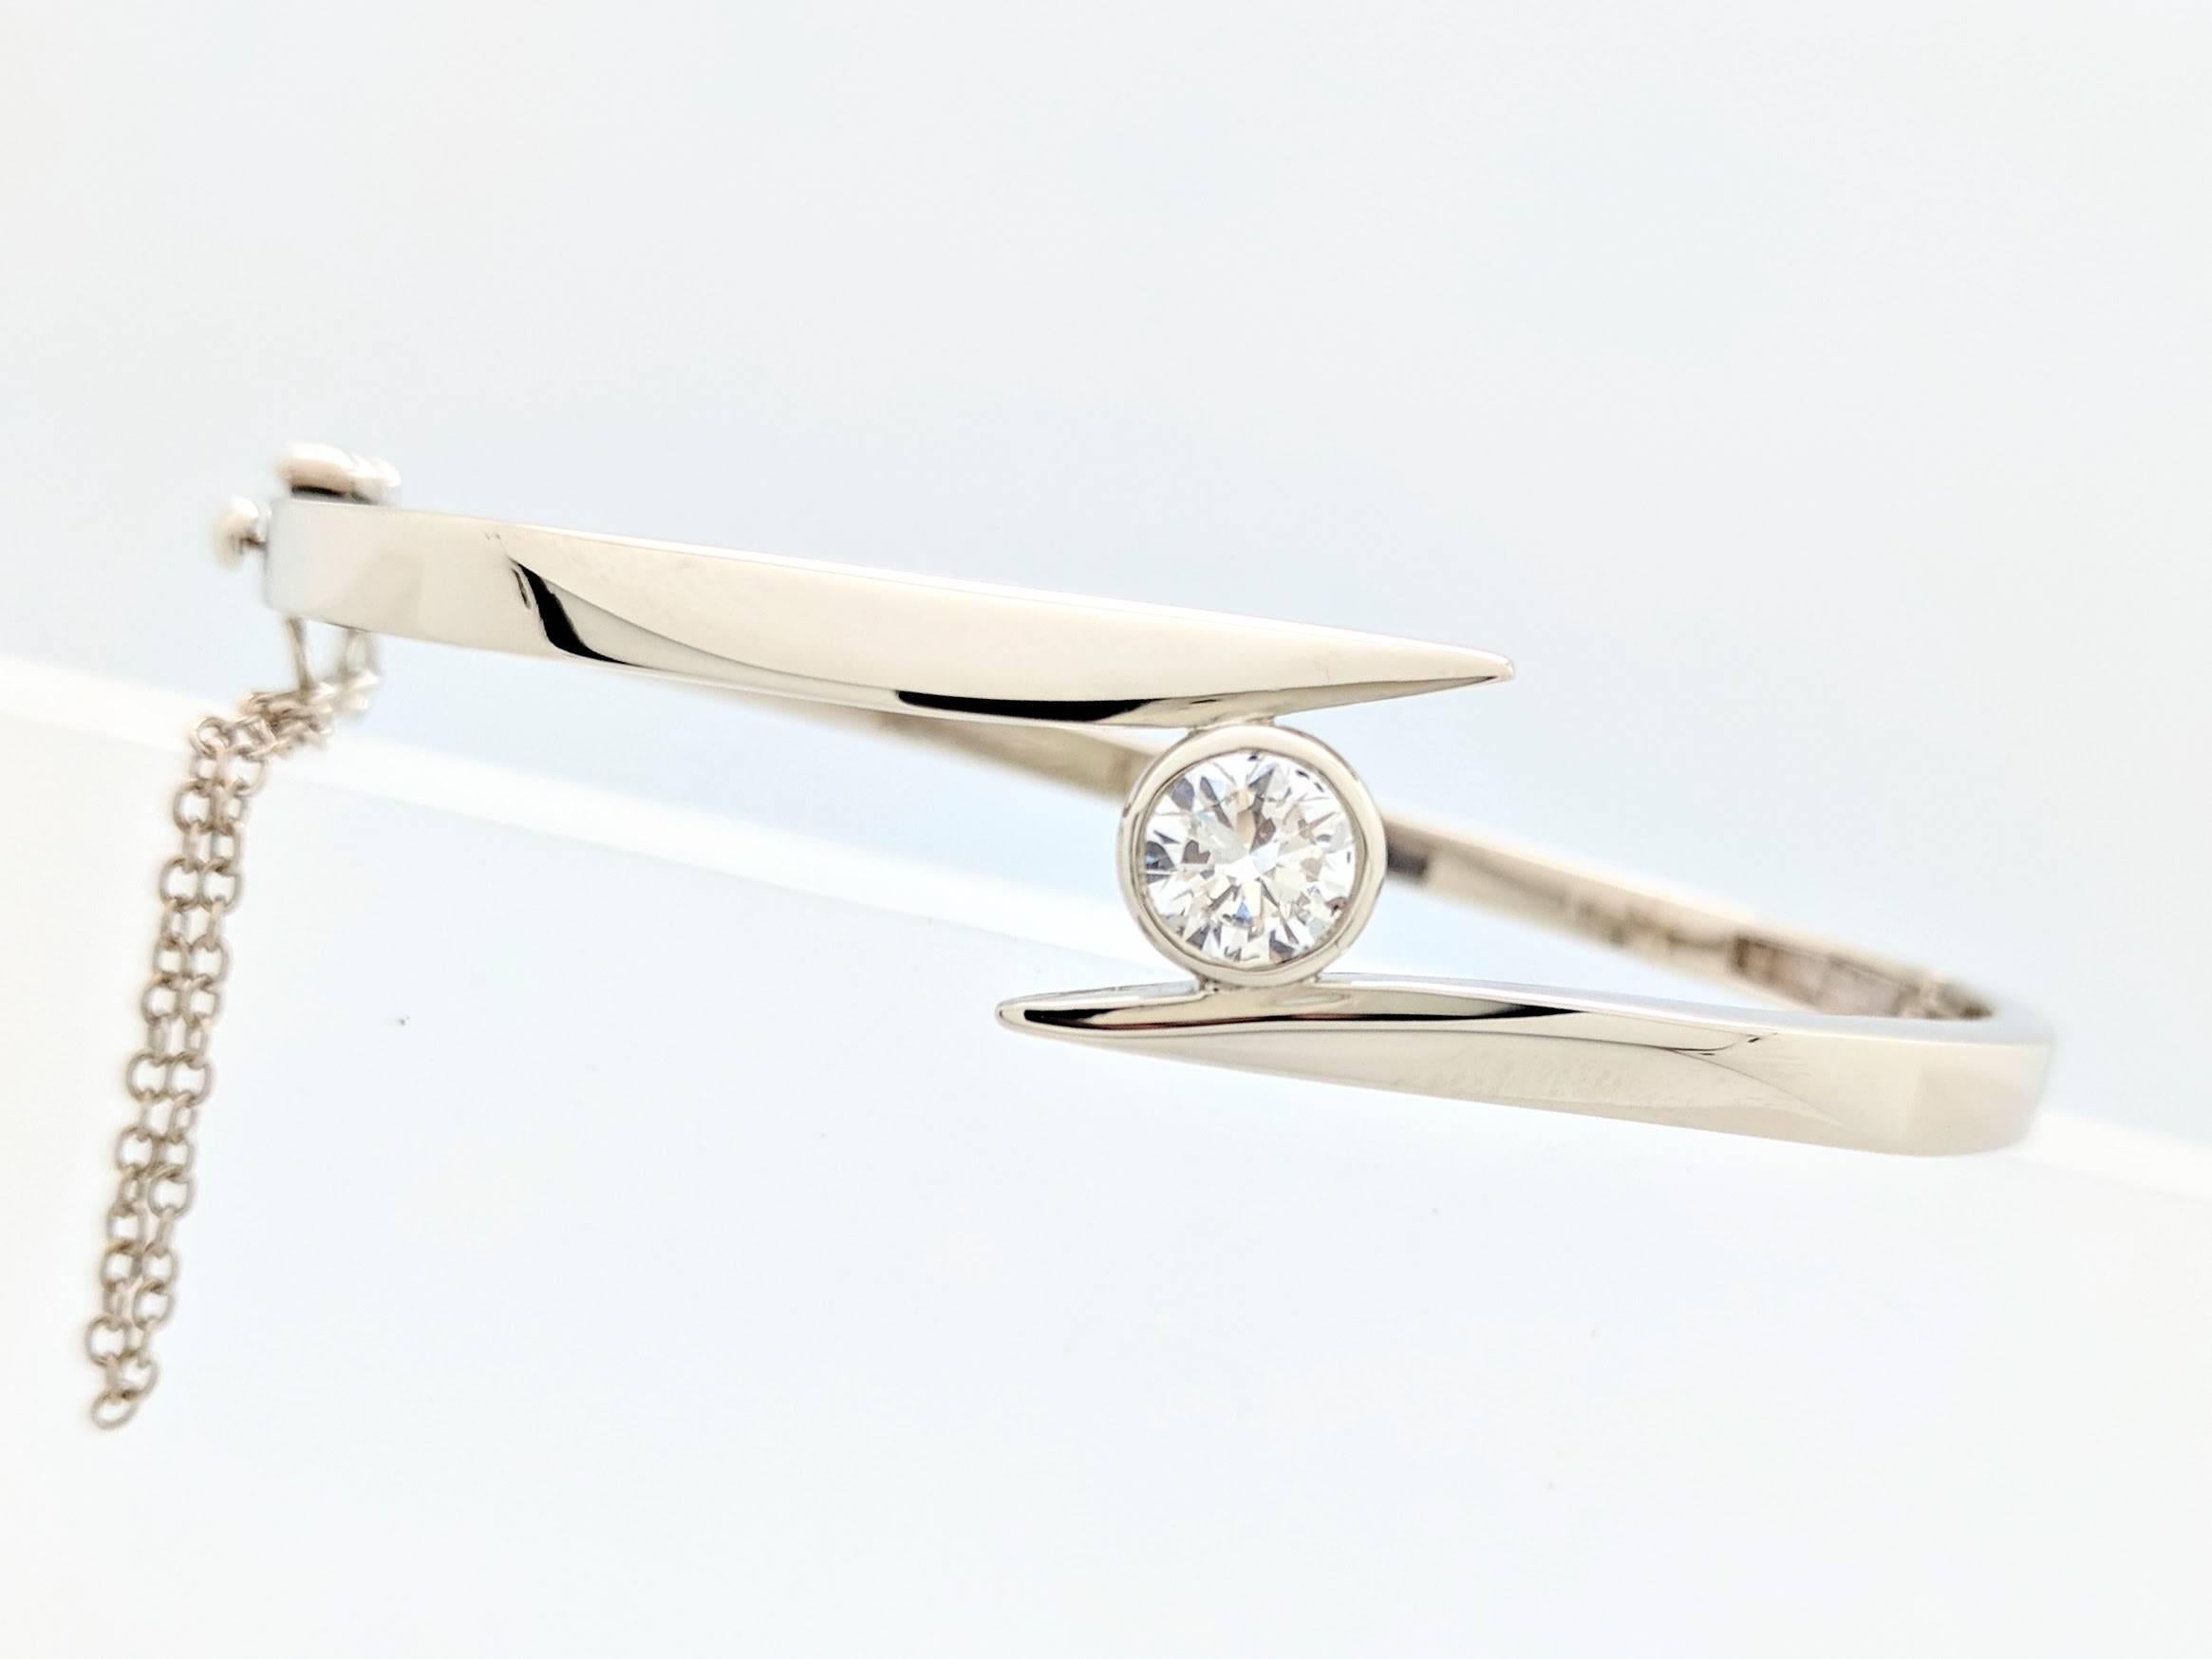 1.14ct Natural Round Diamond Bangle Bracelet in 14k White Gold VS2-D E.G.L. CERT

You are viewing a Stunning Bezel Set Diamond Hinged Bangle Bracelet that is sure to make a statement! The diamond has been certified by E.G.L. and graded as VS2 in